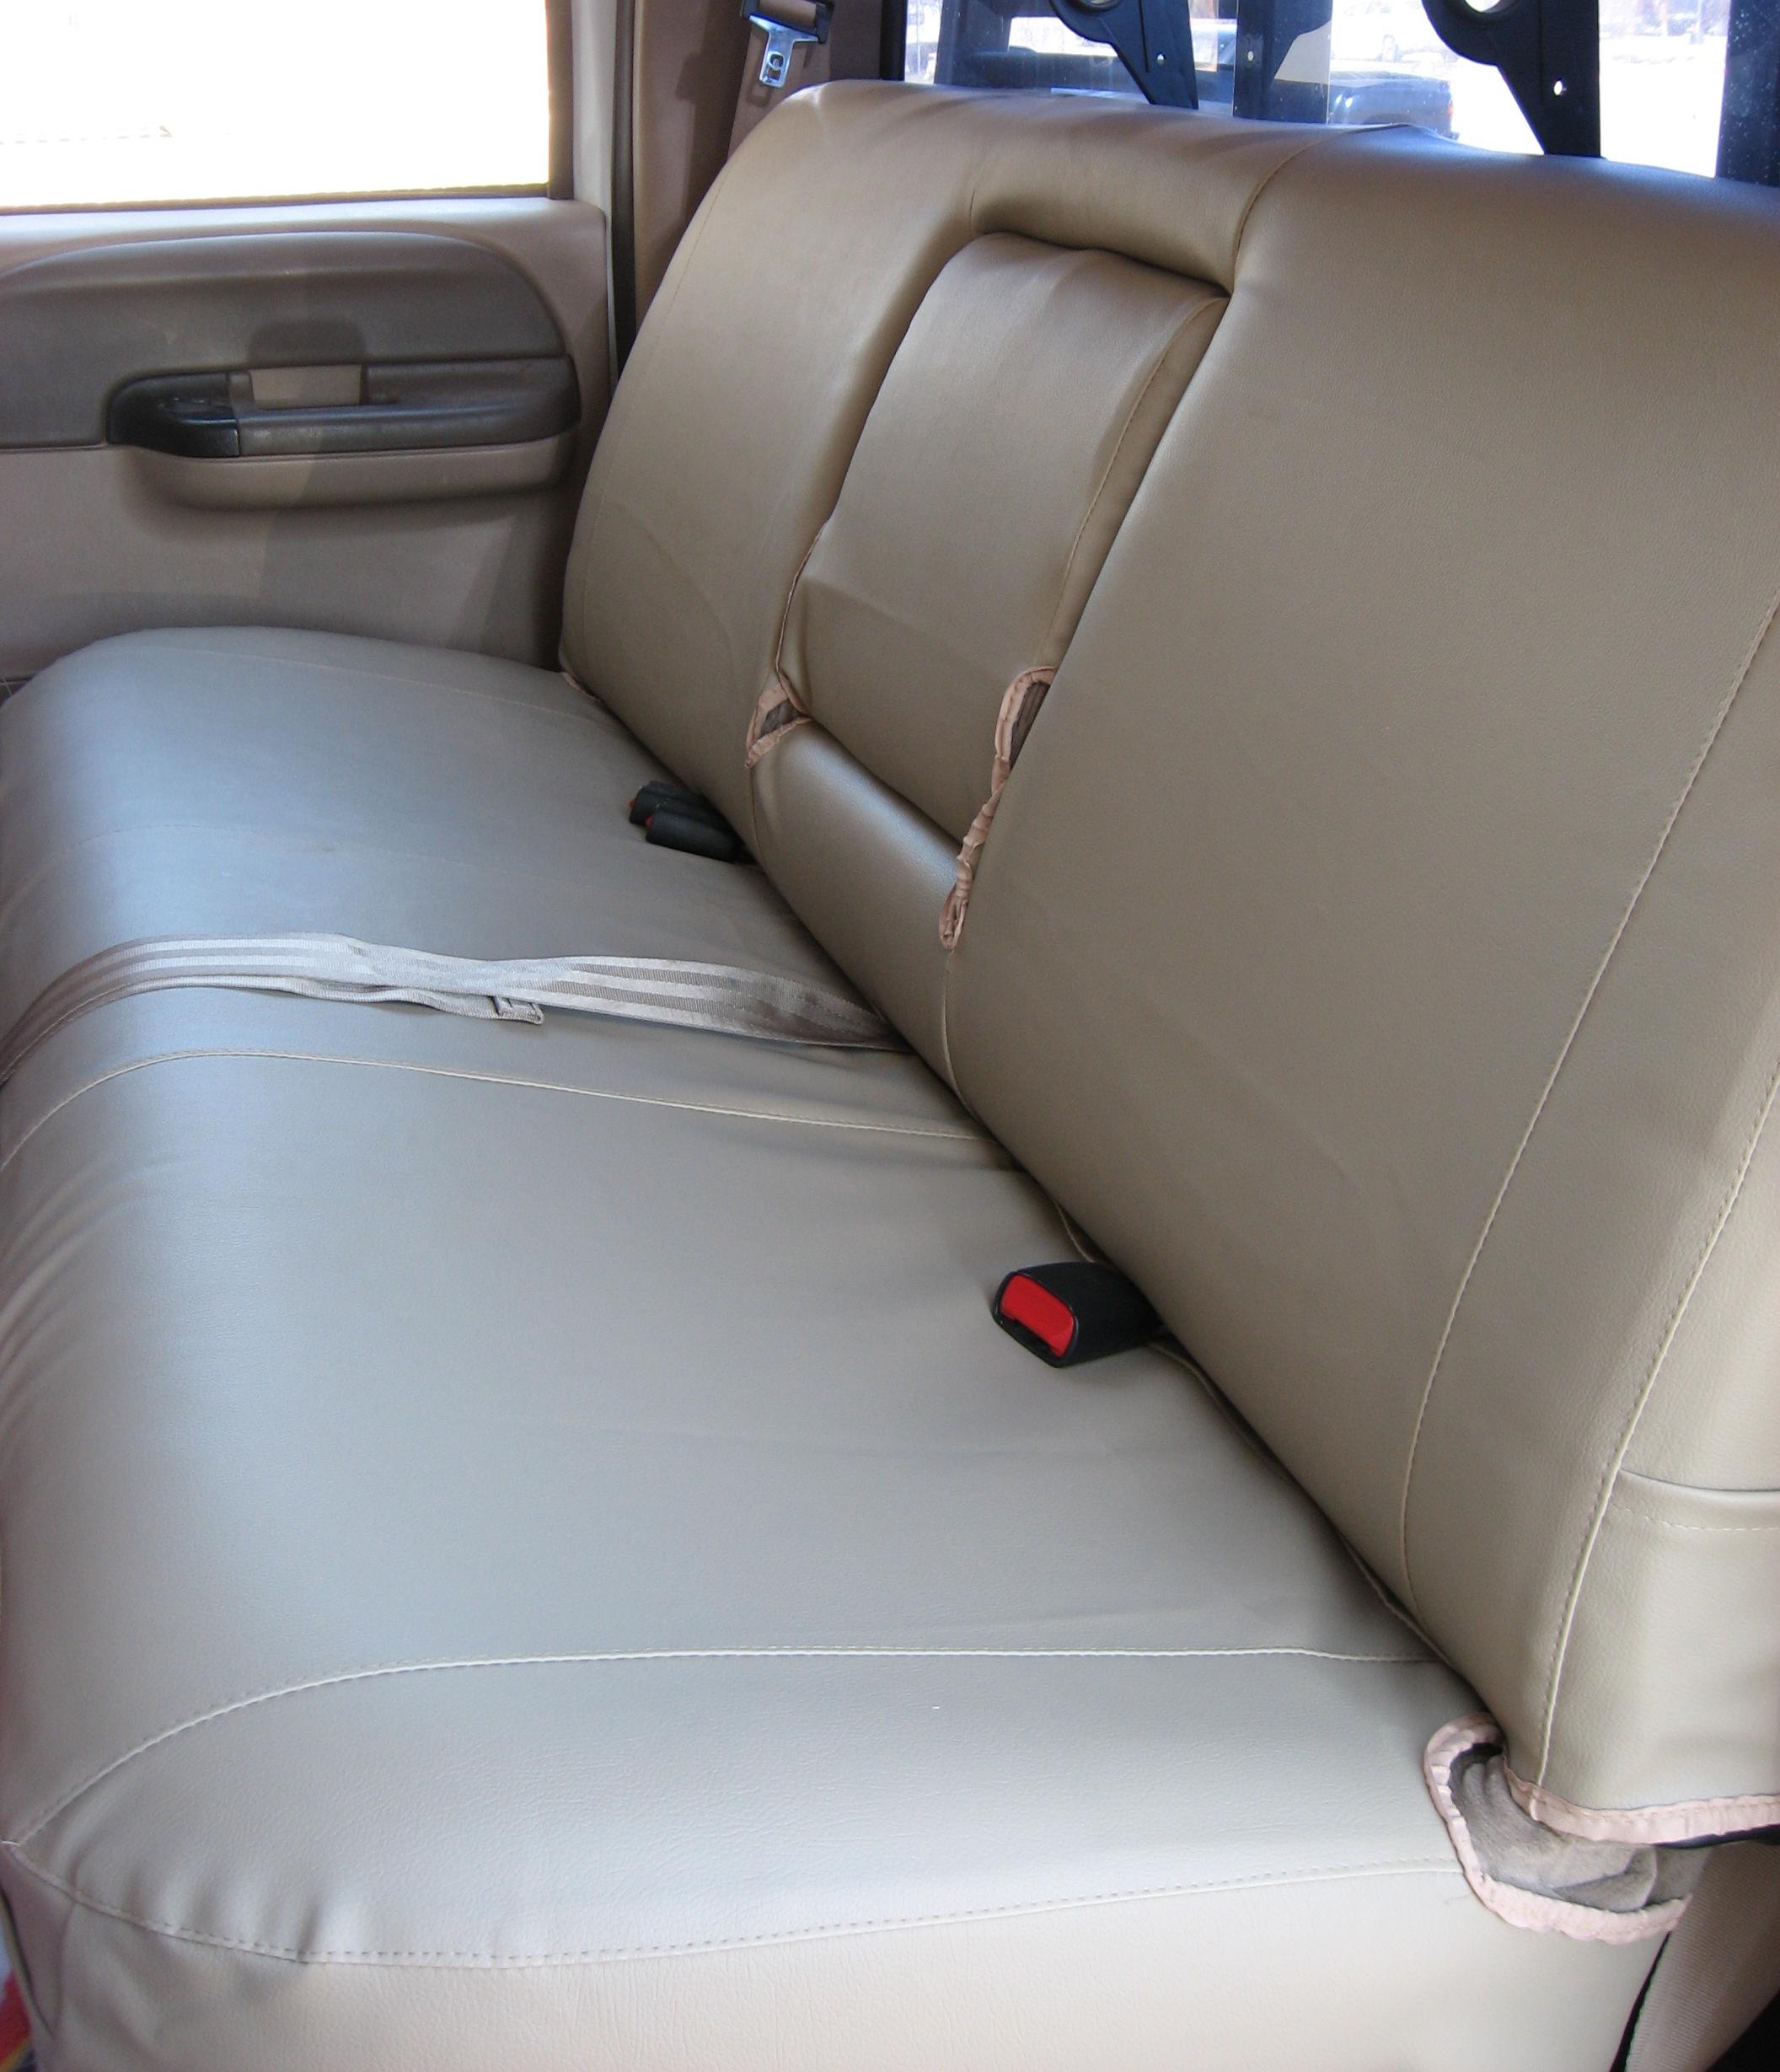 Front 40/20/40 Split Bench Seat Covers in Gray Endura Fabric with Pointed Molded Headrests and Opening Console Durafit Seat Covers Made to fit 1999-2007 Ford F250-F550 